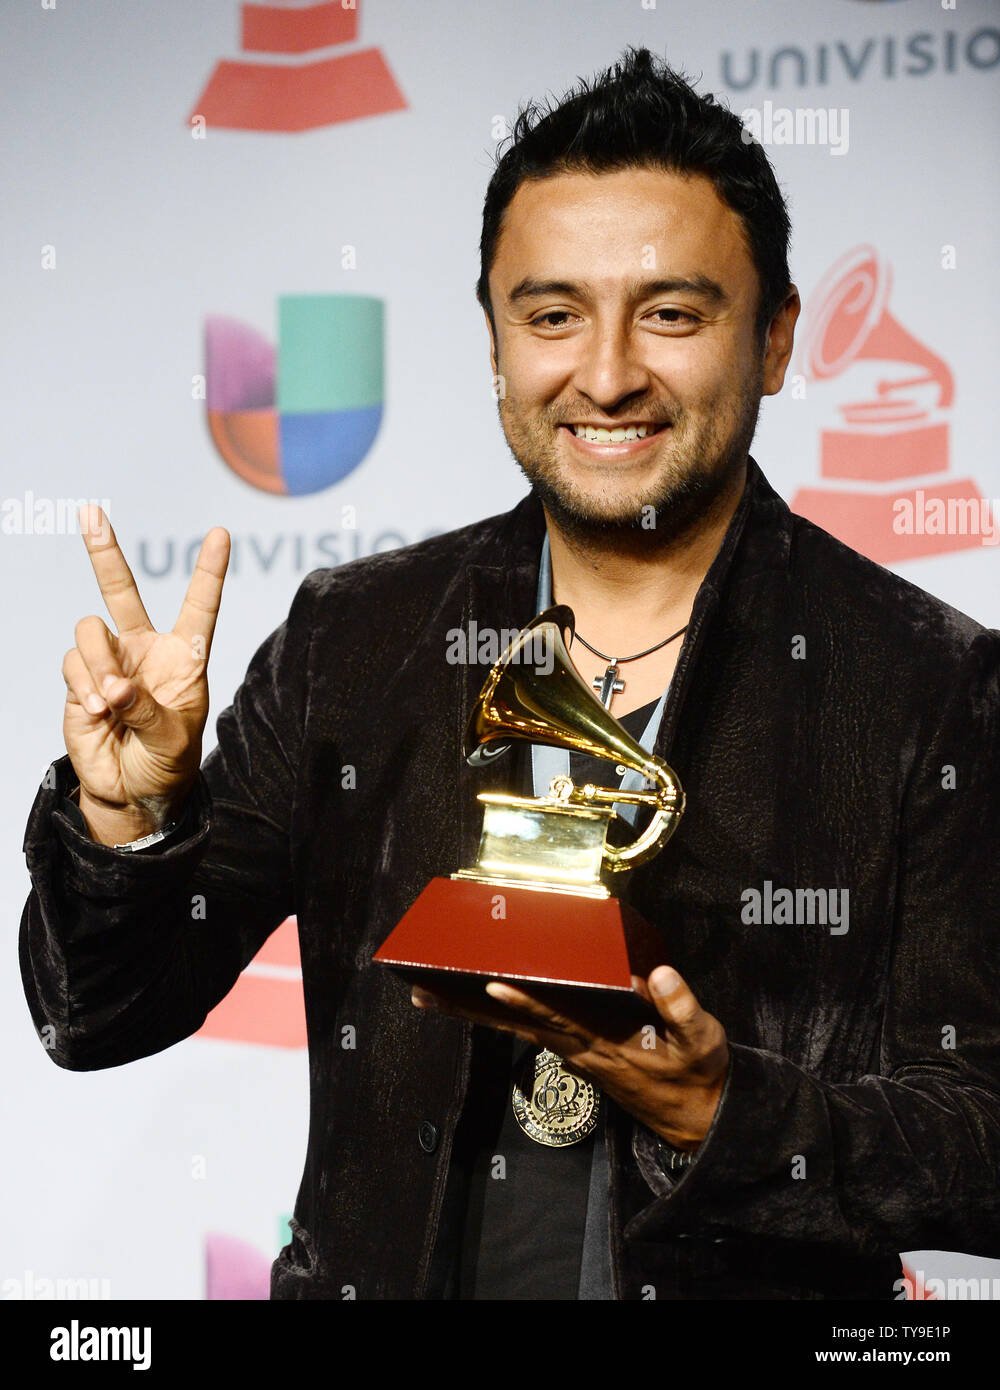 Singer Alex Campos hold the award he won for Best Spanish Christian Album for 'Regreso A Ti,' backstage at the Latin Grammy Awards at the Mandalay Bay Events Center in Las Vegas, Nevada on November 21, 2013.    UPI/Jim Ruymen Stock Photo